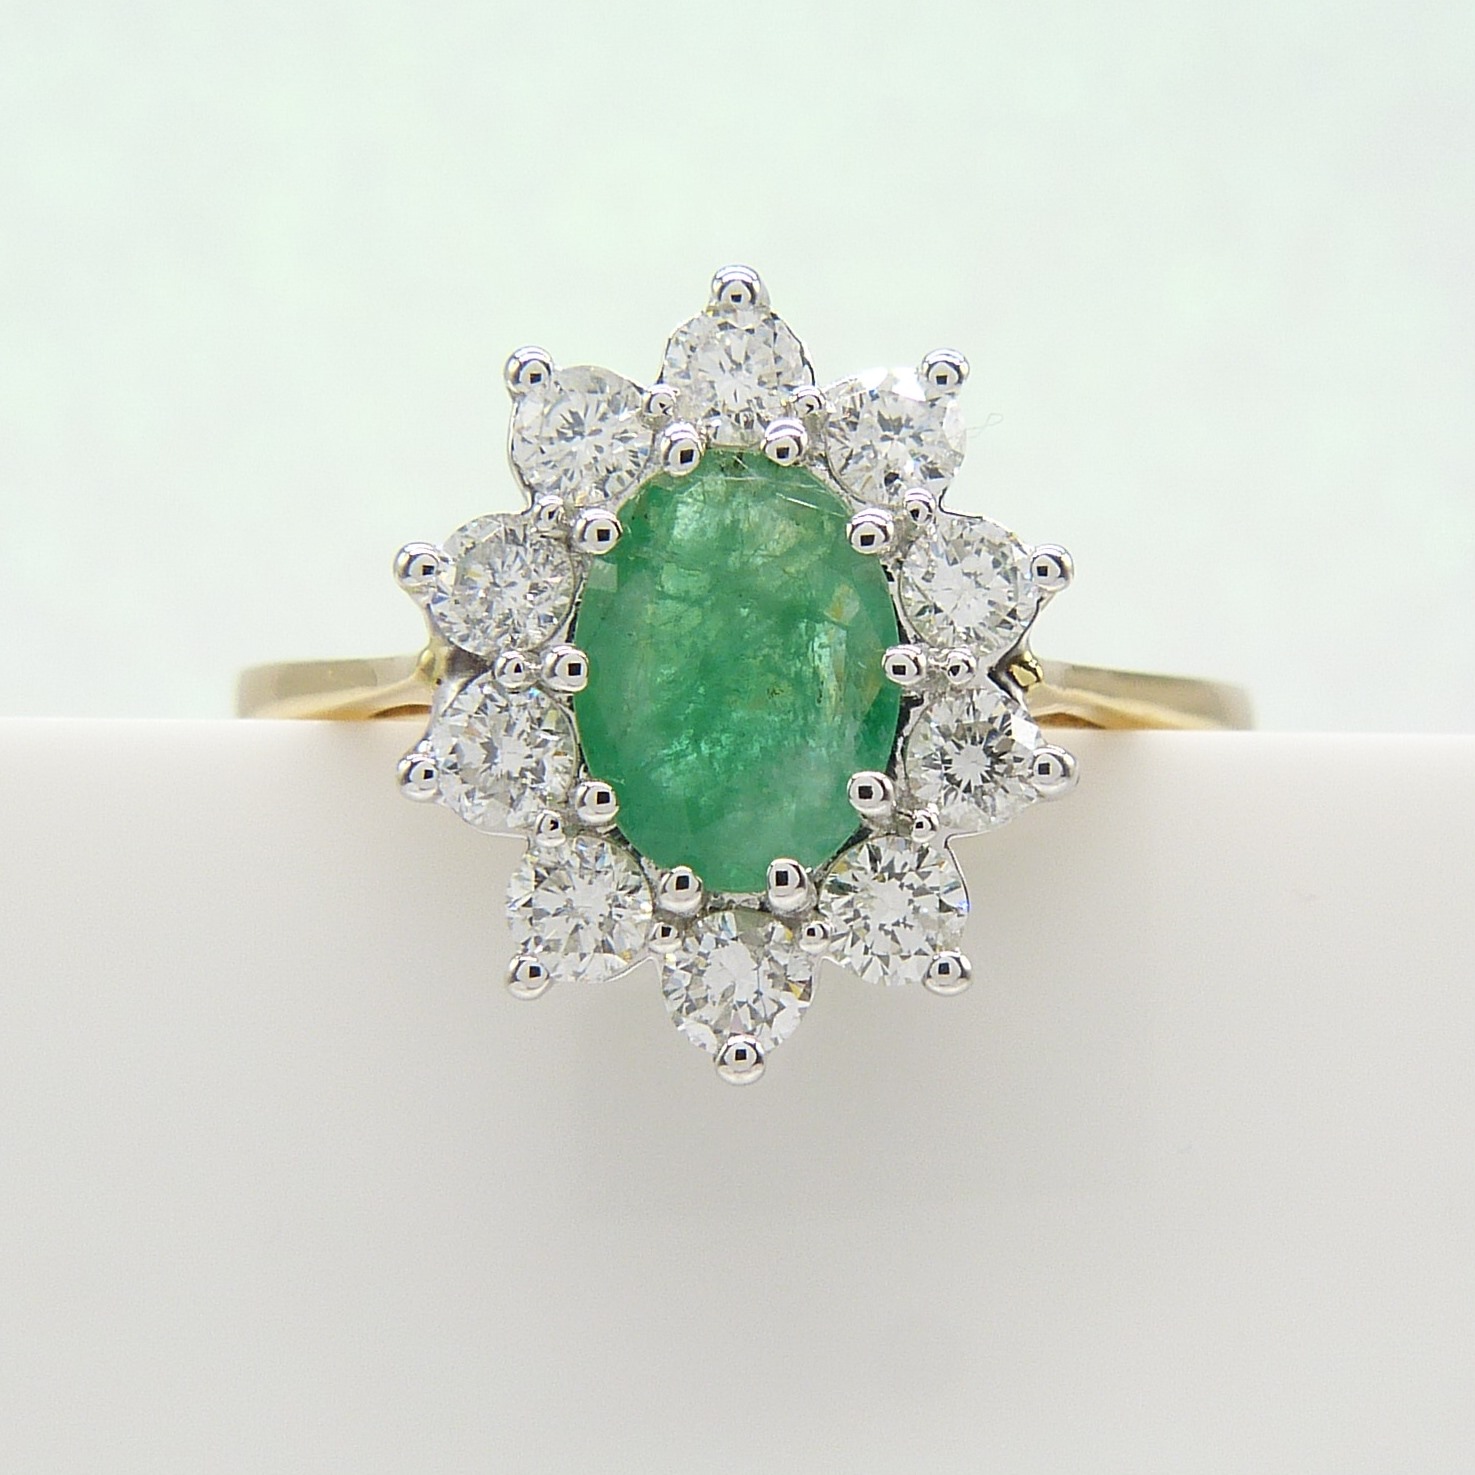 A certificated 18ct yellow Gold oval Emerald gemstone and round brilliant-cut Diamond ring - Image 8 of 10